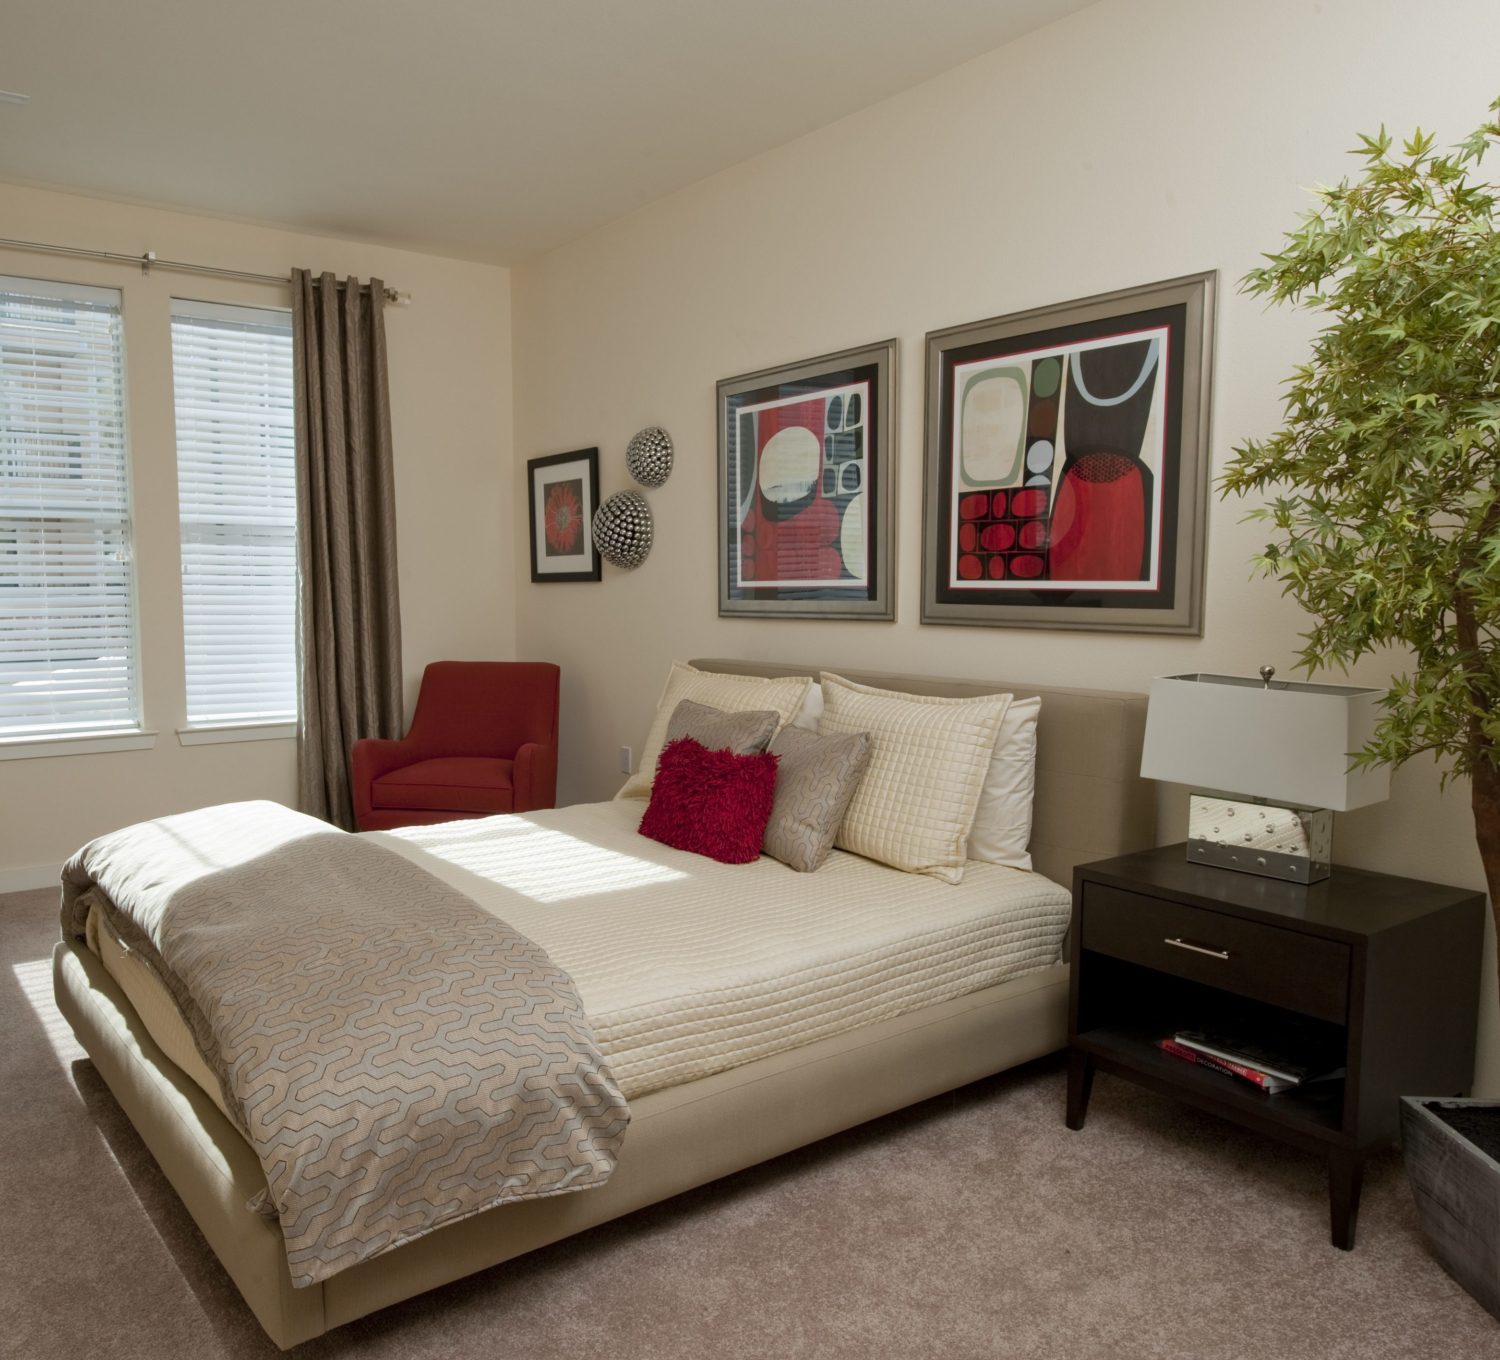 A fully-furnished bedroom with a large window